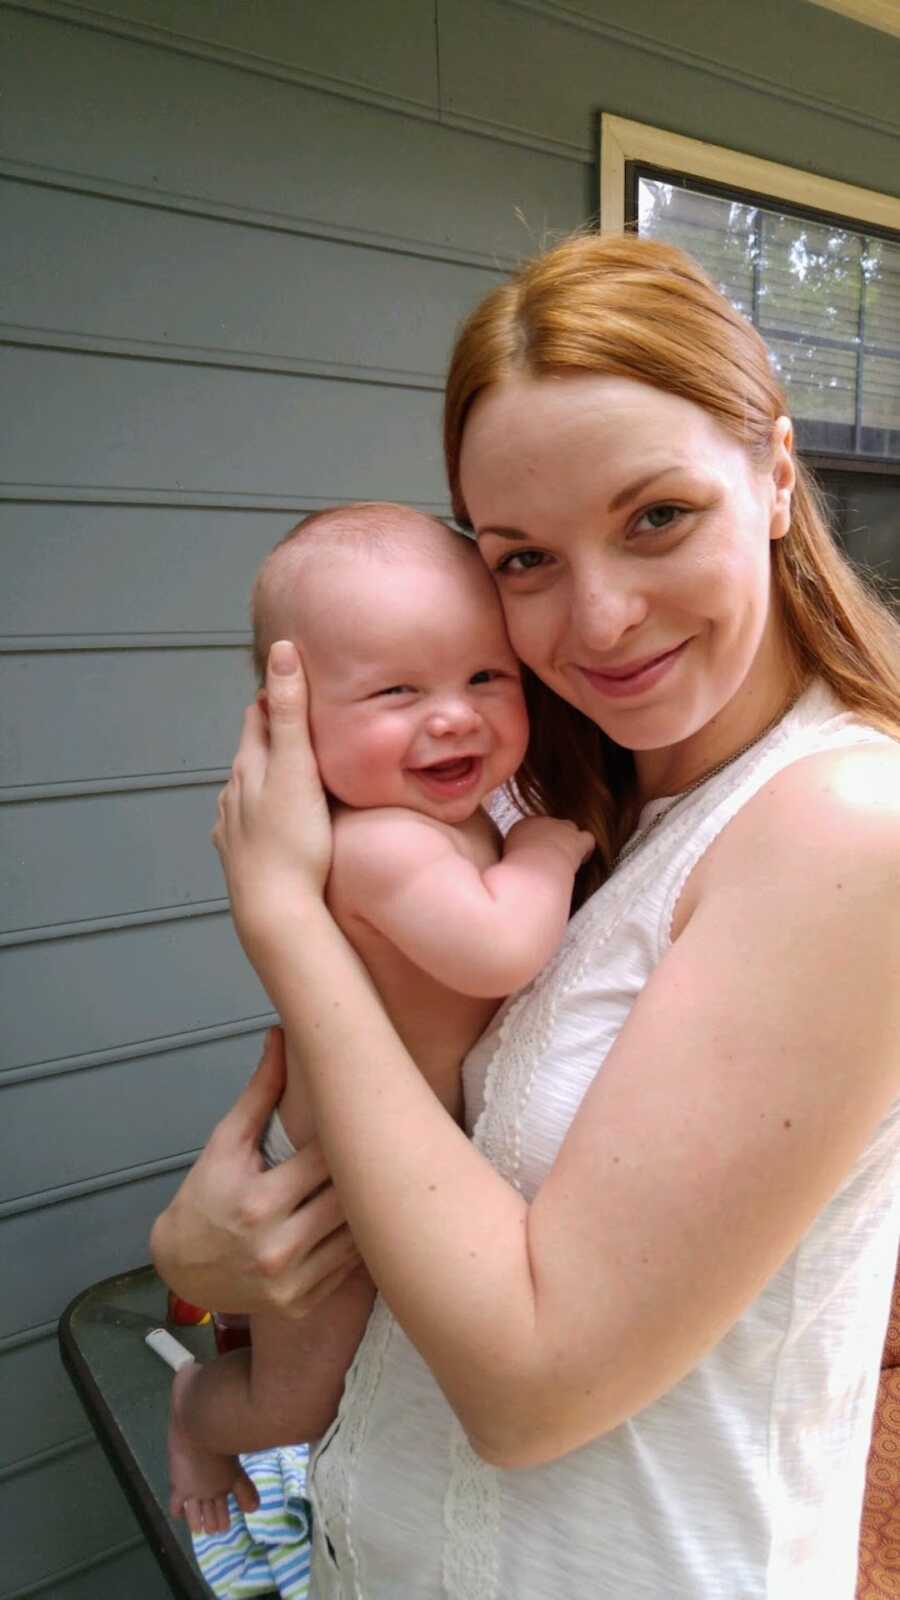 addict mother holding baby boy in diaper